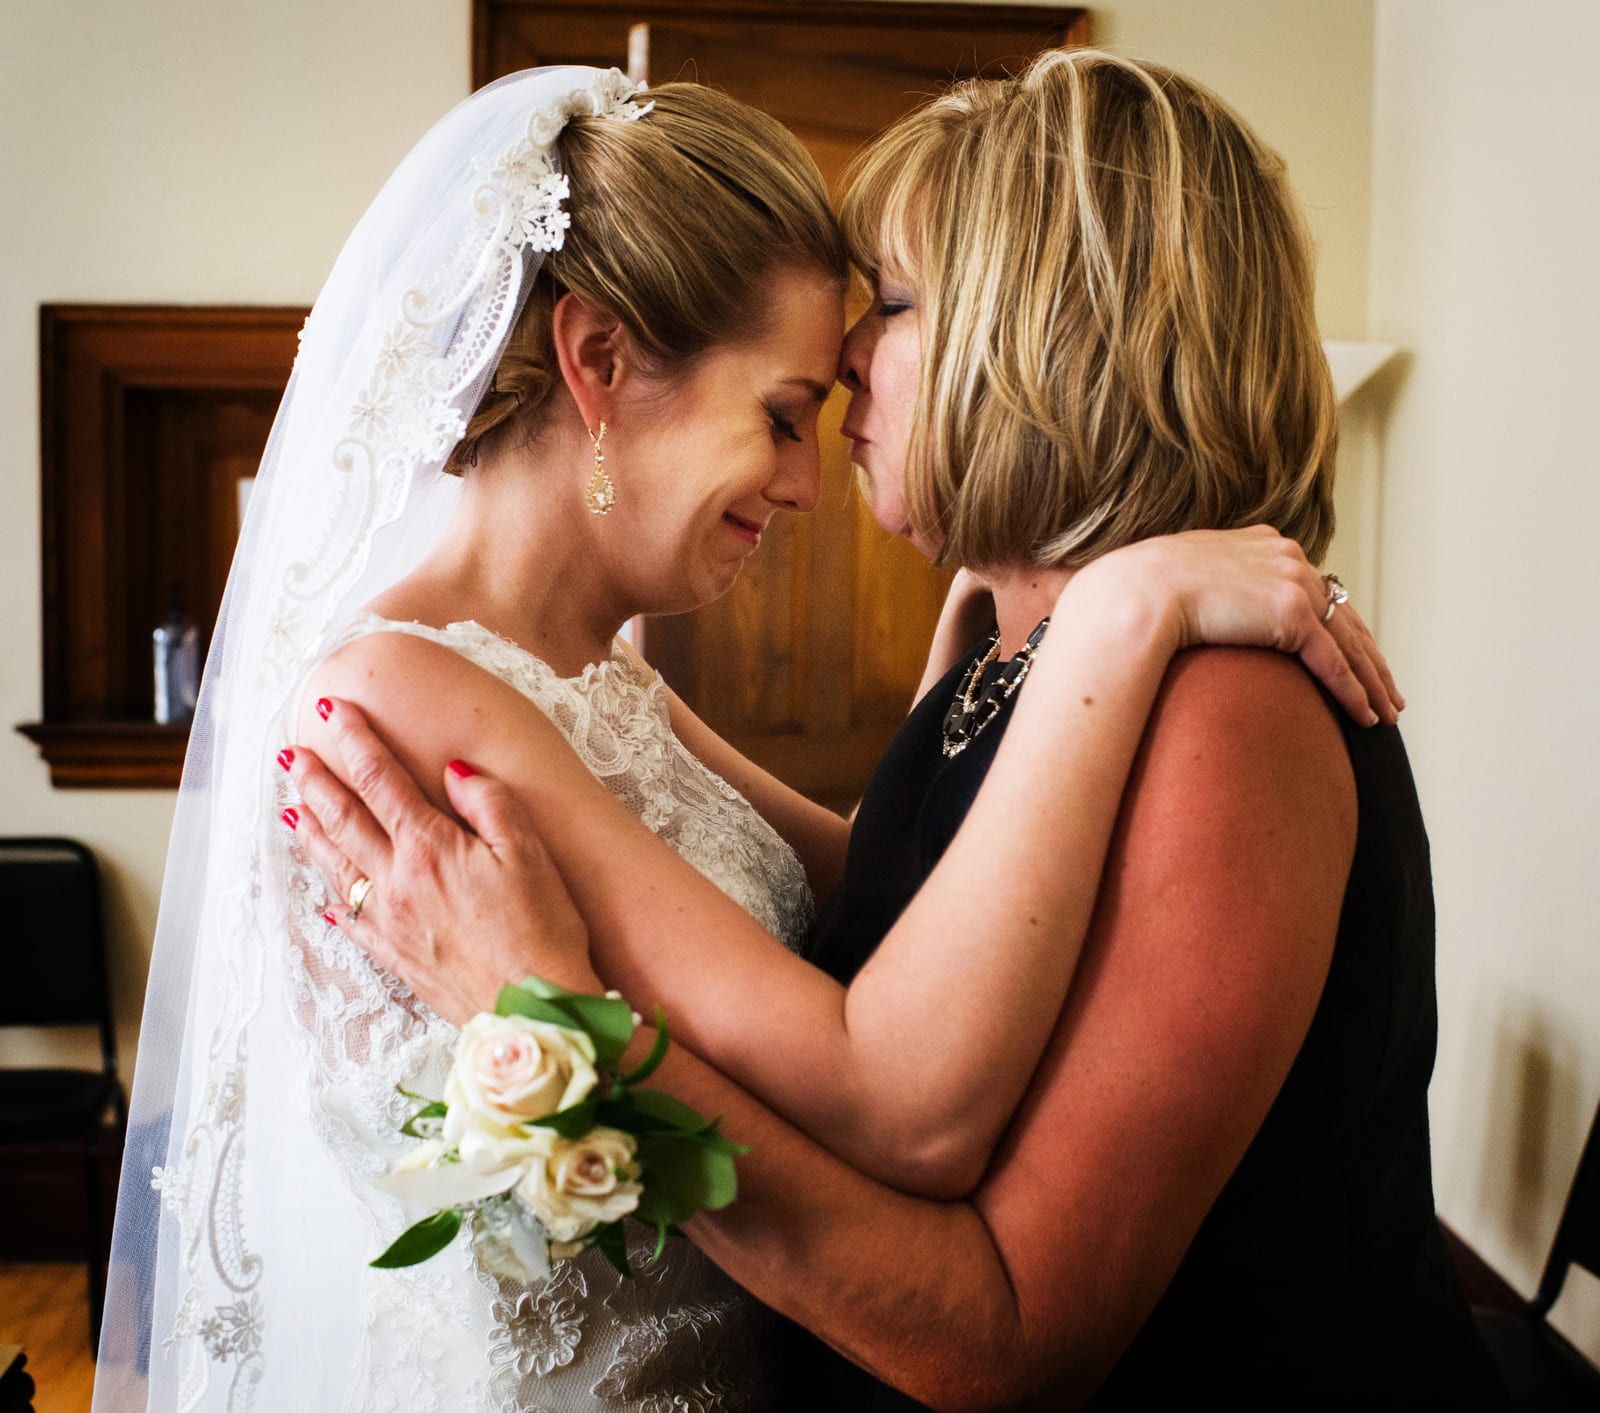 A bride cries as she hugs her mom before her wedding at the Wyndham Grand hotel in Pittsburgh.